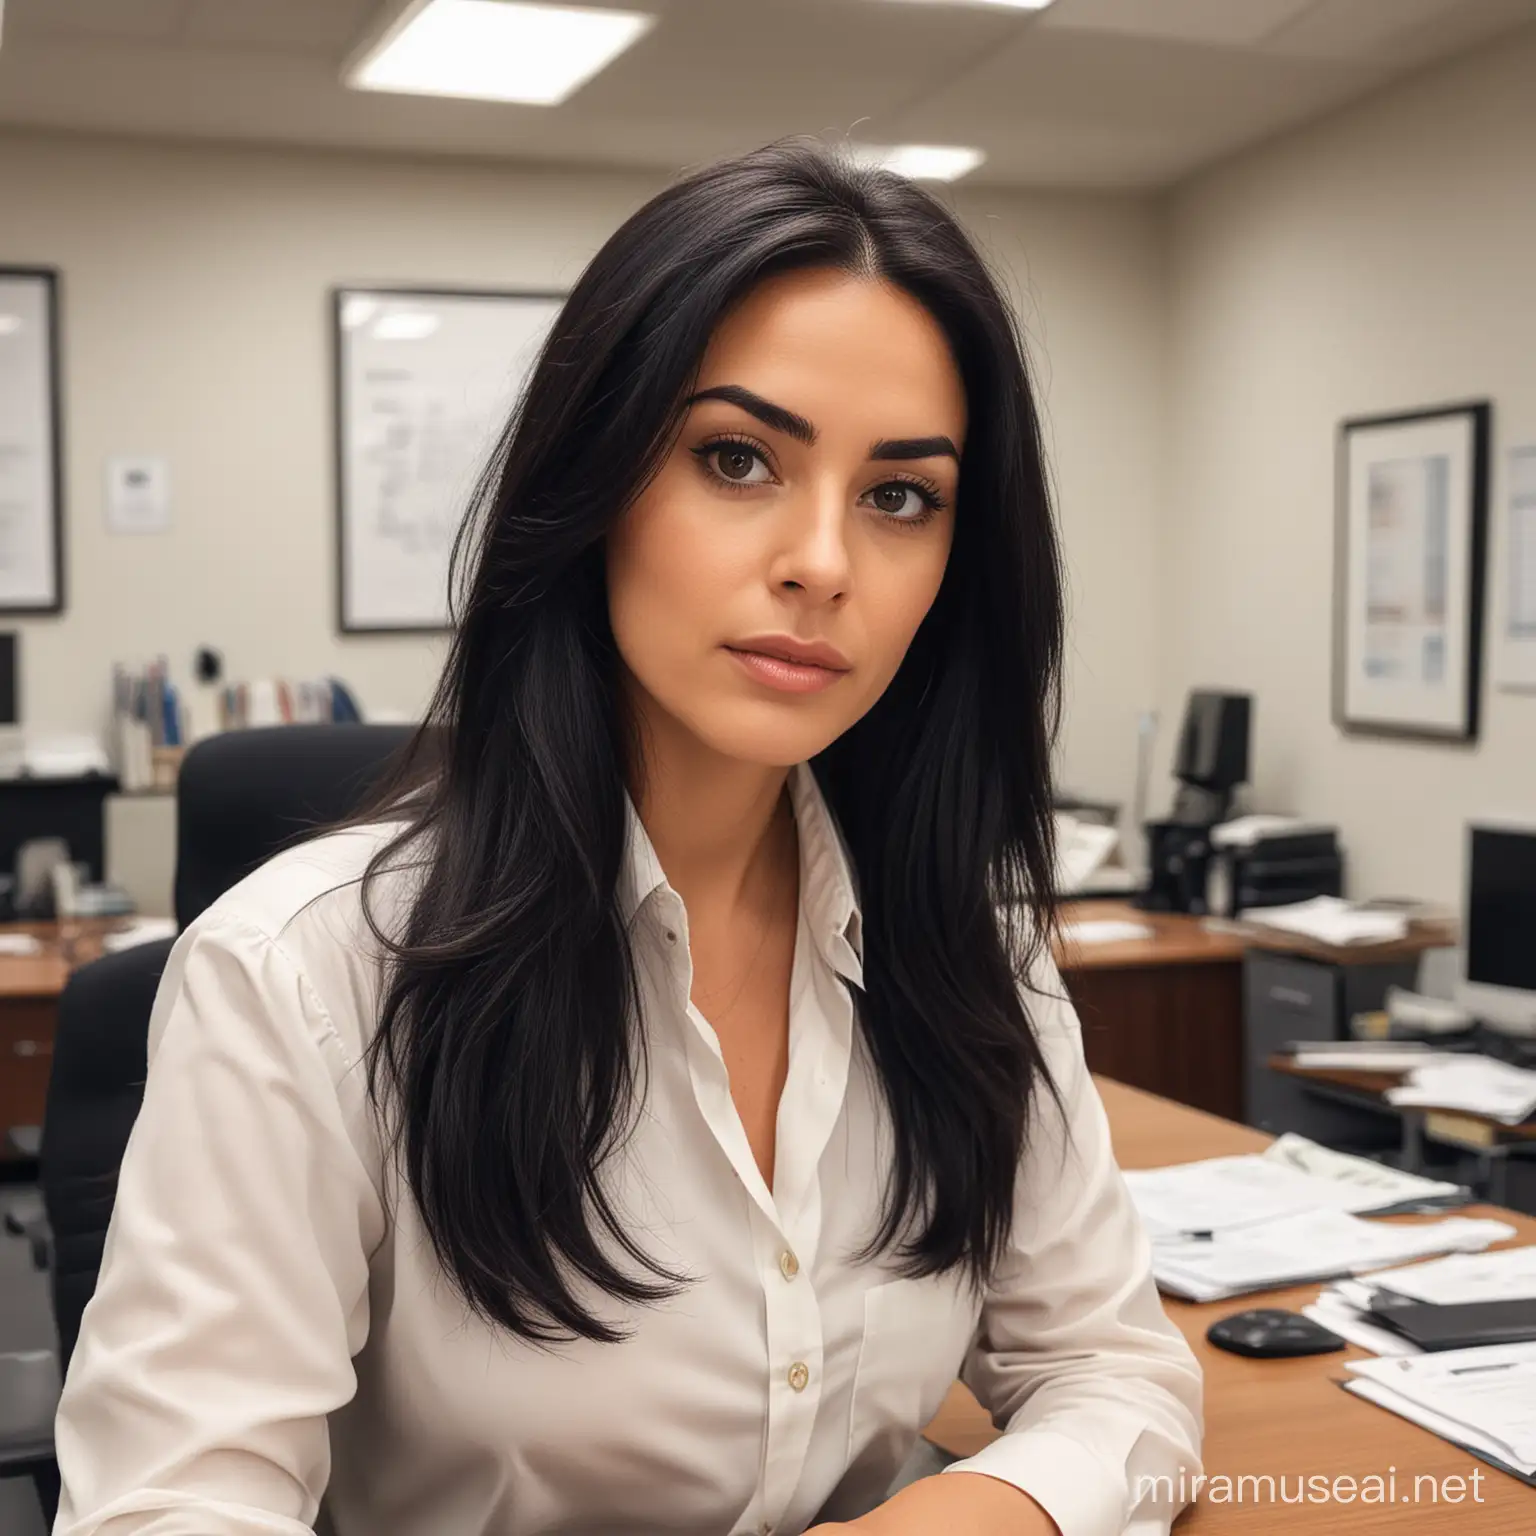 Professional Female Lawyer with Elegant Appearance in Own Office Building